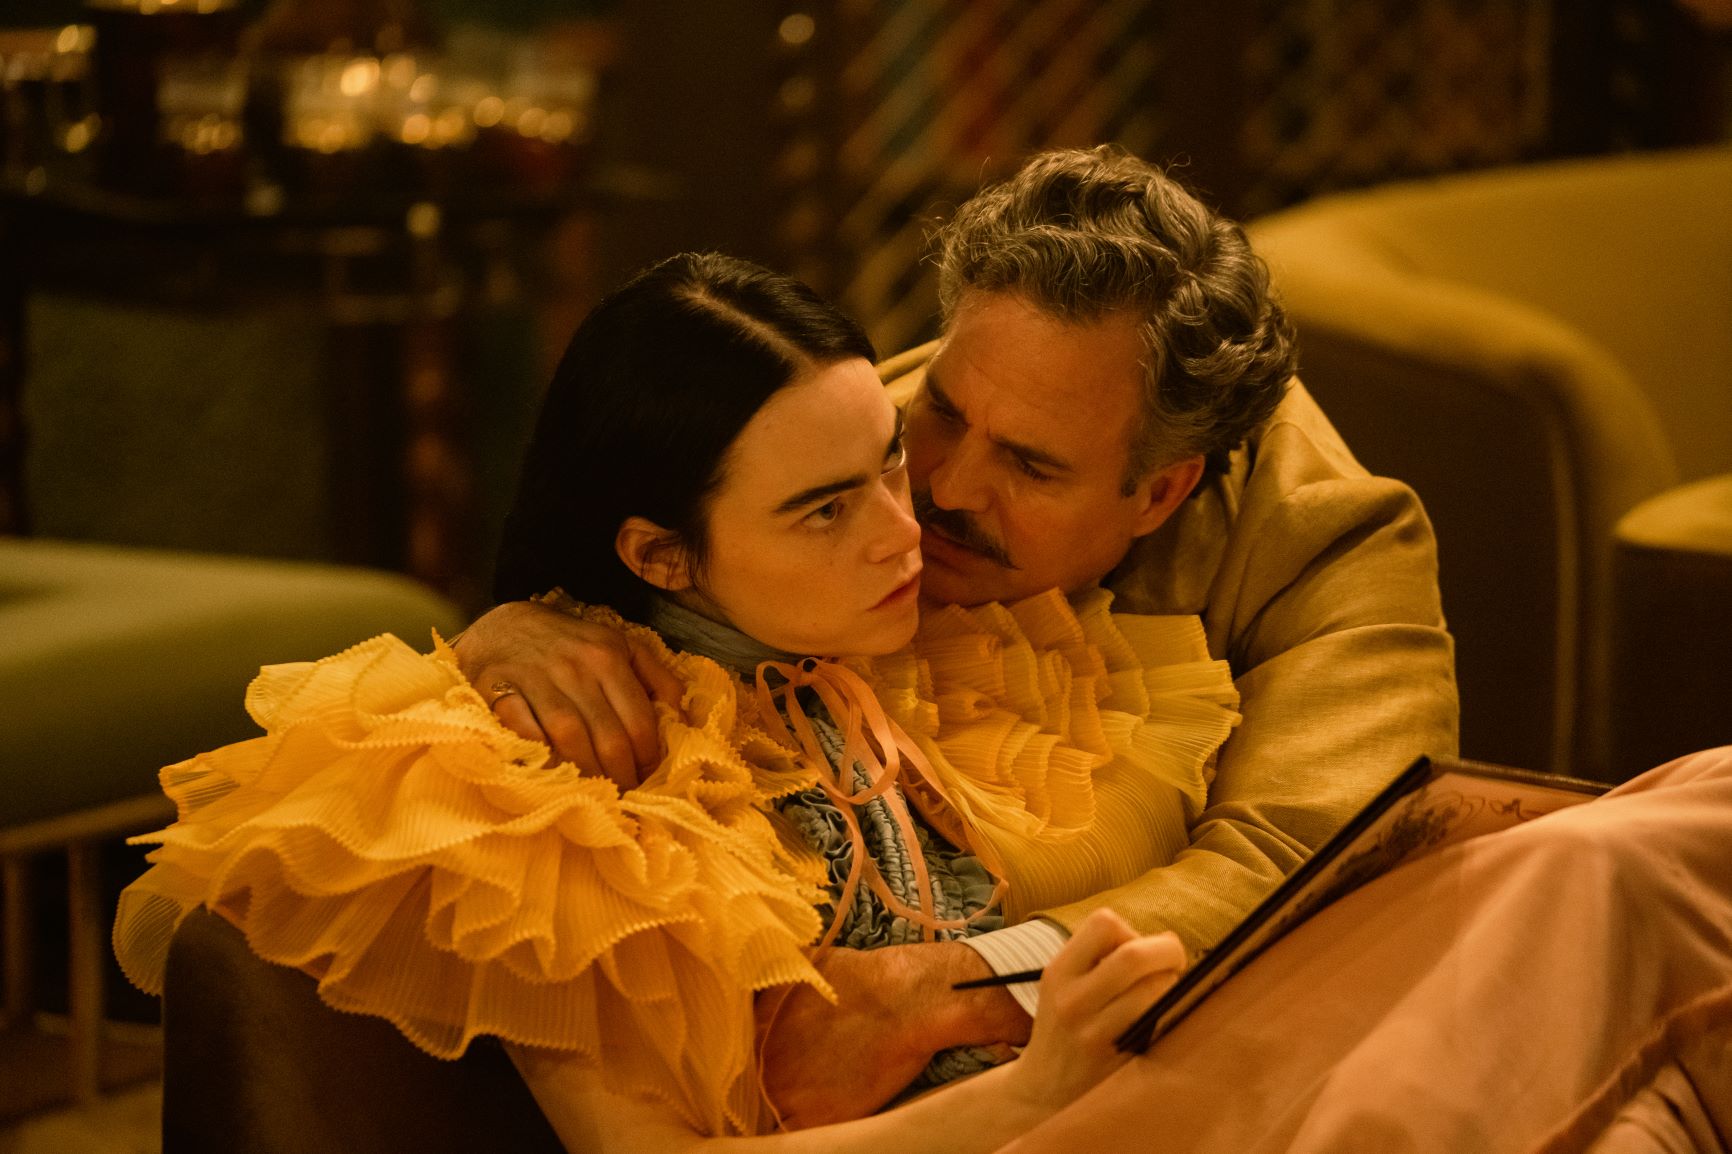 A woman with thick eyebrows and a frilly outfit, stares off intensely while a mustached man cuddles against her. 